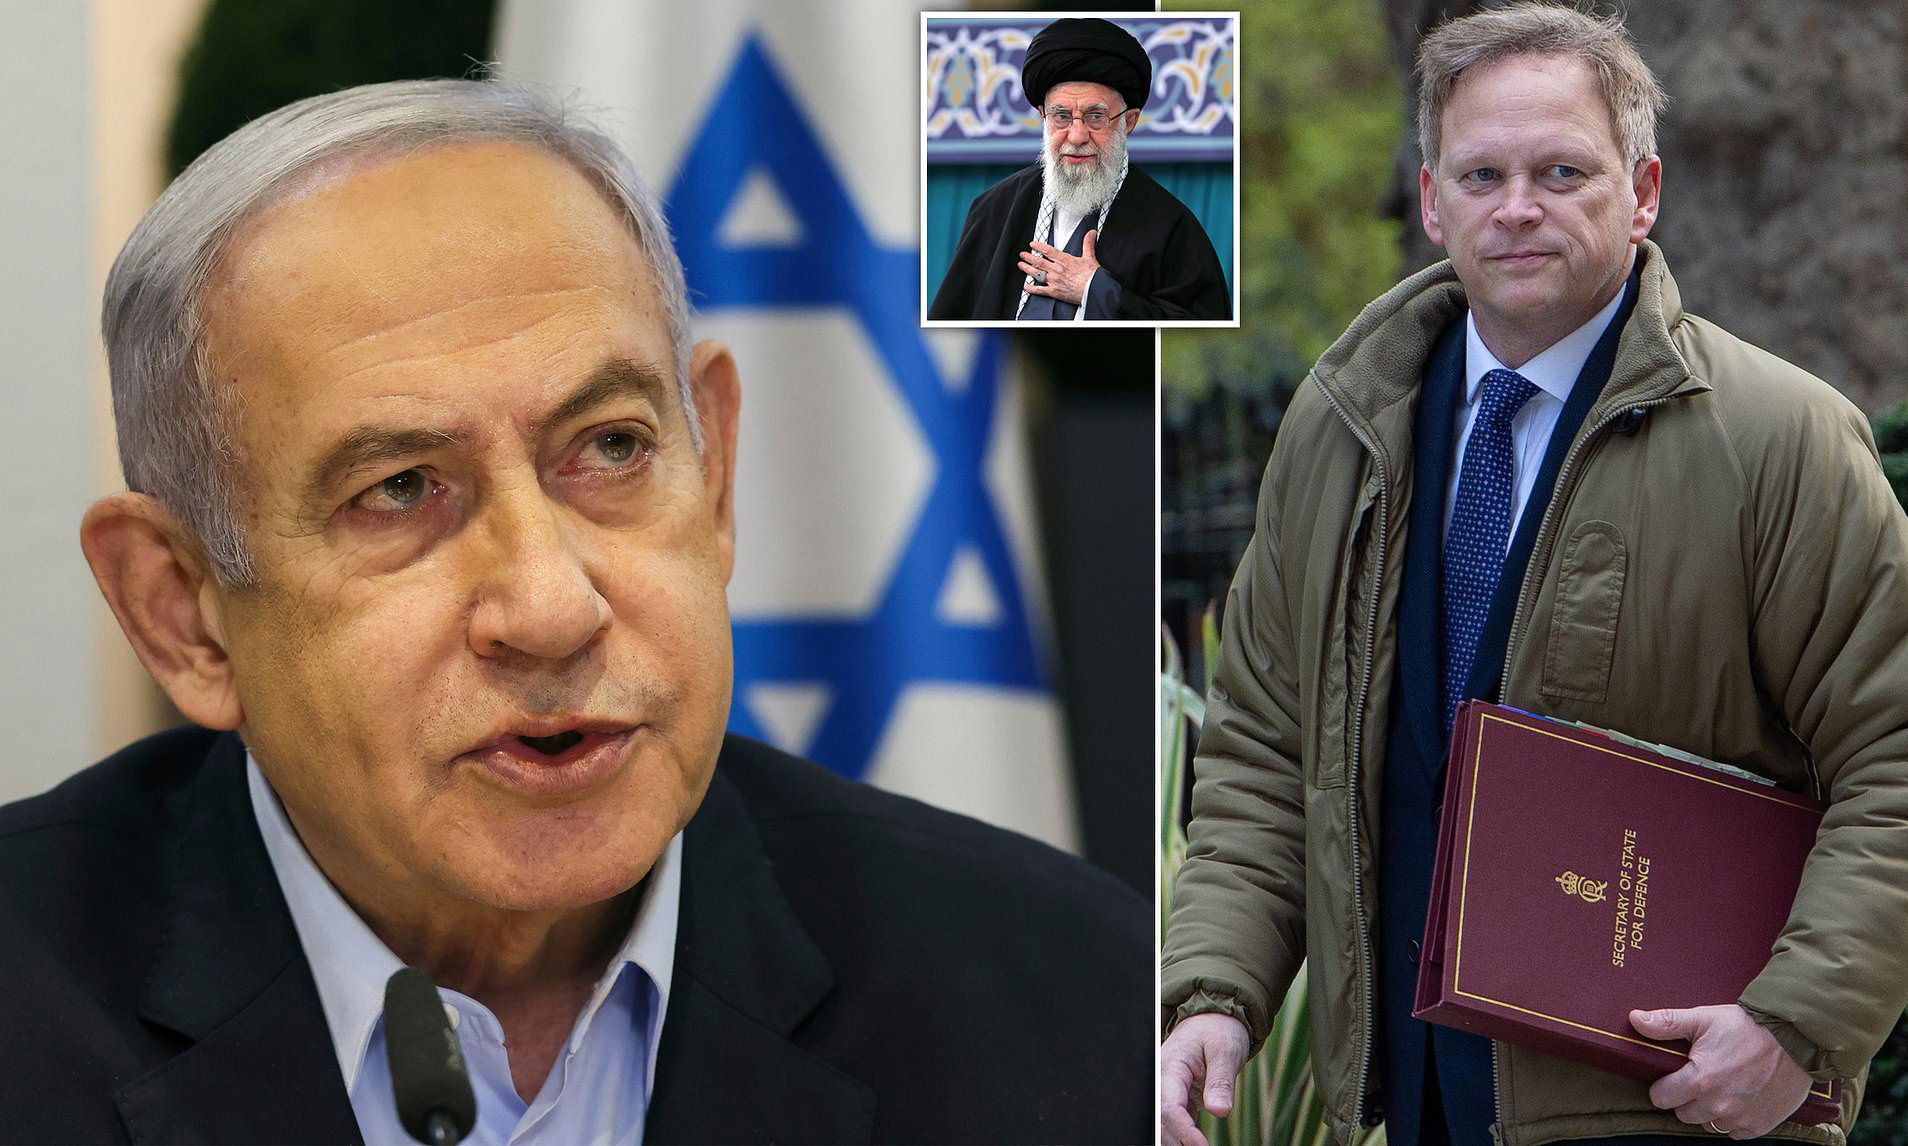 Grant Shapps warns Iran against attacking Israel as Benjamin Netanyahu vows to 'harm whoever harms us'